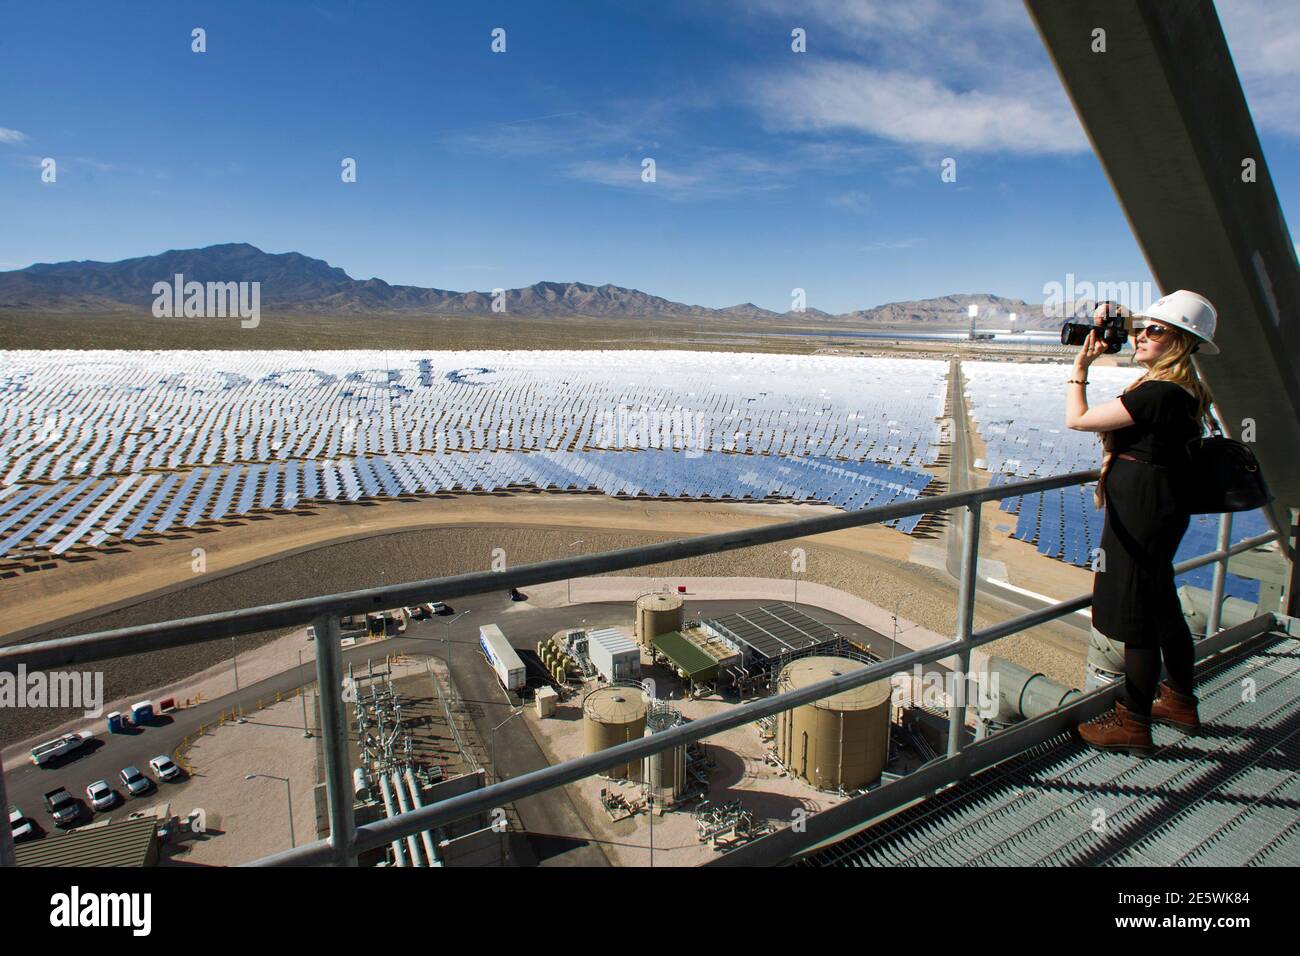 Katie Kukulka, an information officer with the California Energy Commission, takes photos during a tour of the Ivanpah Solar Electric Generating System in the Mojave Desert near the California-Nevada border February 13, 2014. The project, a partnership of NRG, BrightSource, Google and Bechtel, is the world's largest solar thermal facility and uses 347,000 sun-facing mirrors to produce 392 Megawatts of electricity, enough energy to power more than 140,000 homes. REUTERS/Steve Marcus (UNITED STATES - Tags: ENERGY BUSINESS SCIENCE TECHNOLOGY) Stock Photo